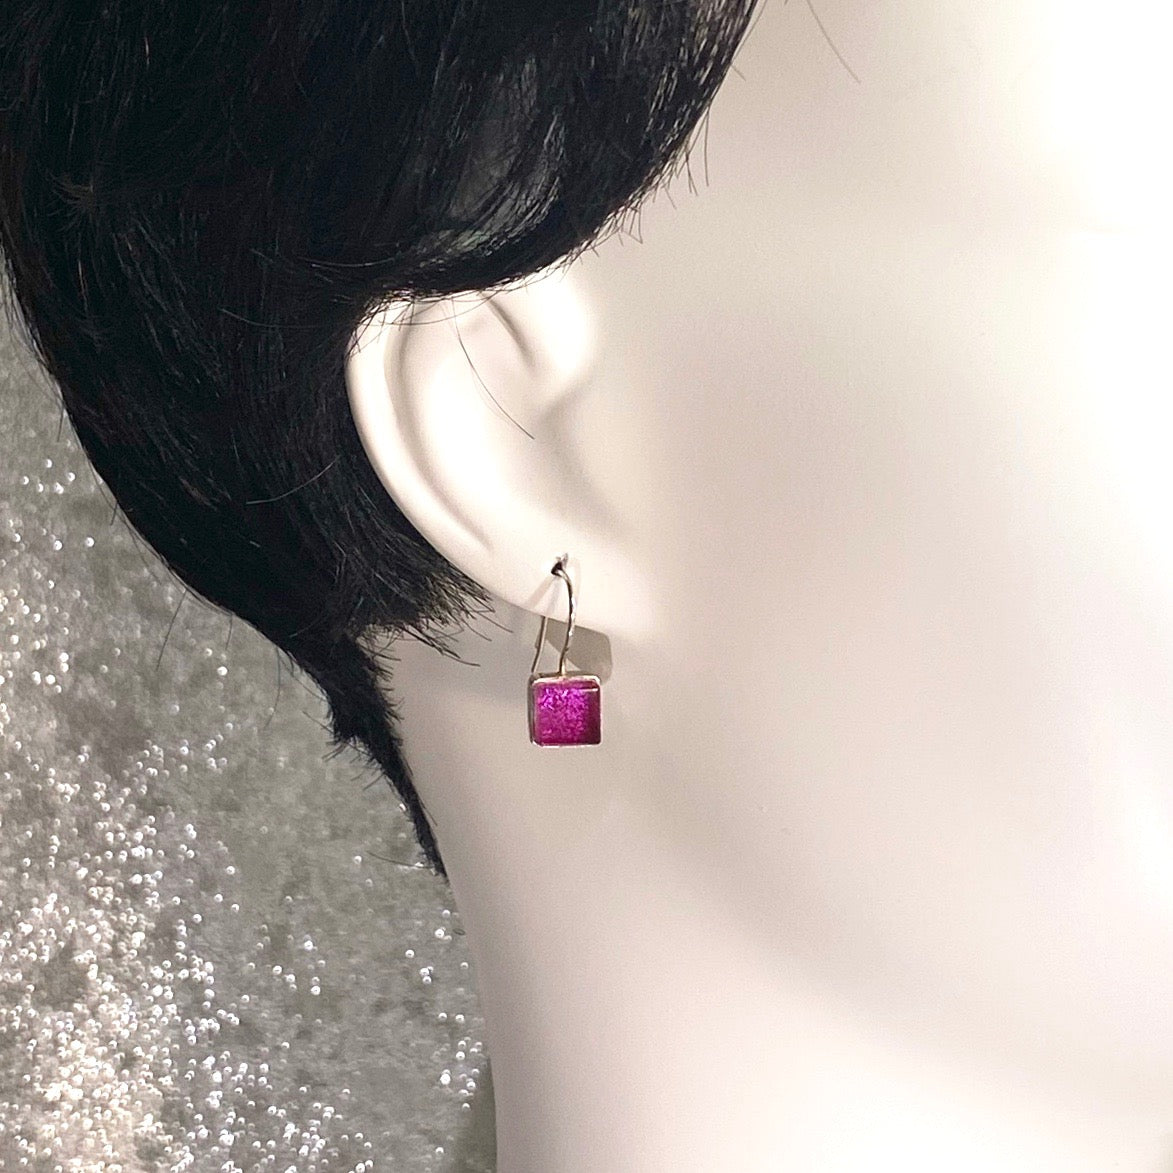 watermelon, pink, square earrings, fused glass, glass jewelry, glass and silver jewelry, handmade, handcrafted, American Craft, hand fabricated jewelry, hand fabricated jewellery, Athen, Georgia, colorful jewelry, sparkle, bullseye glass, dichroic glass, art jewelry